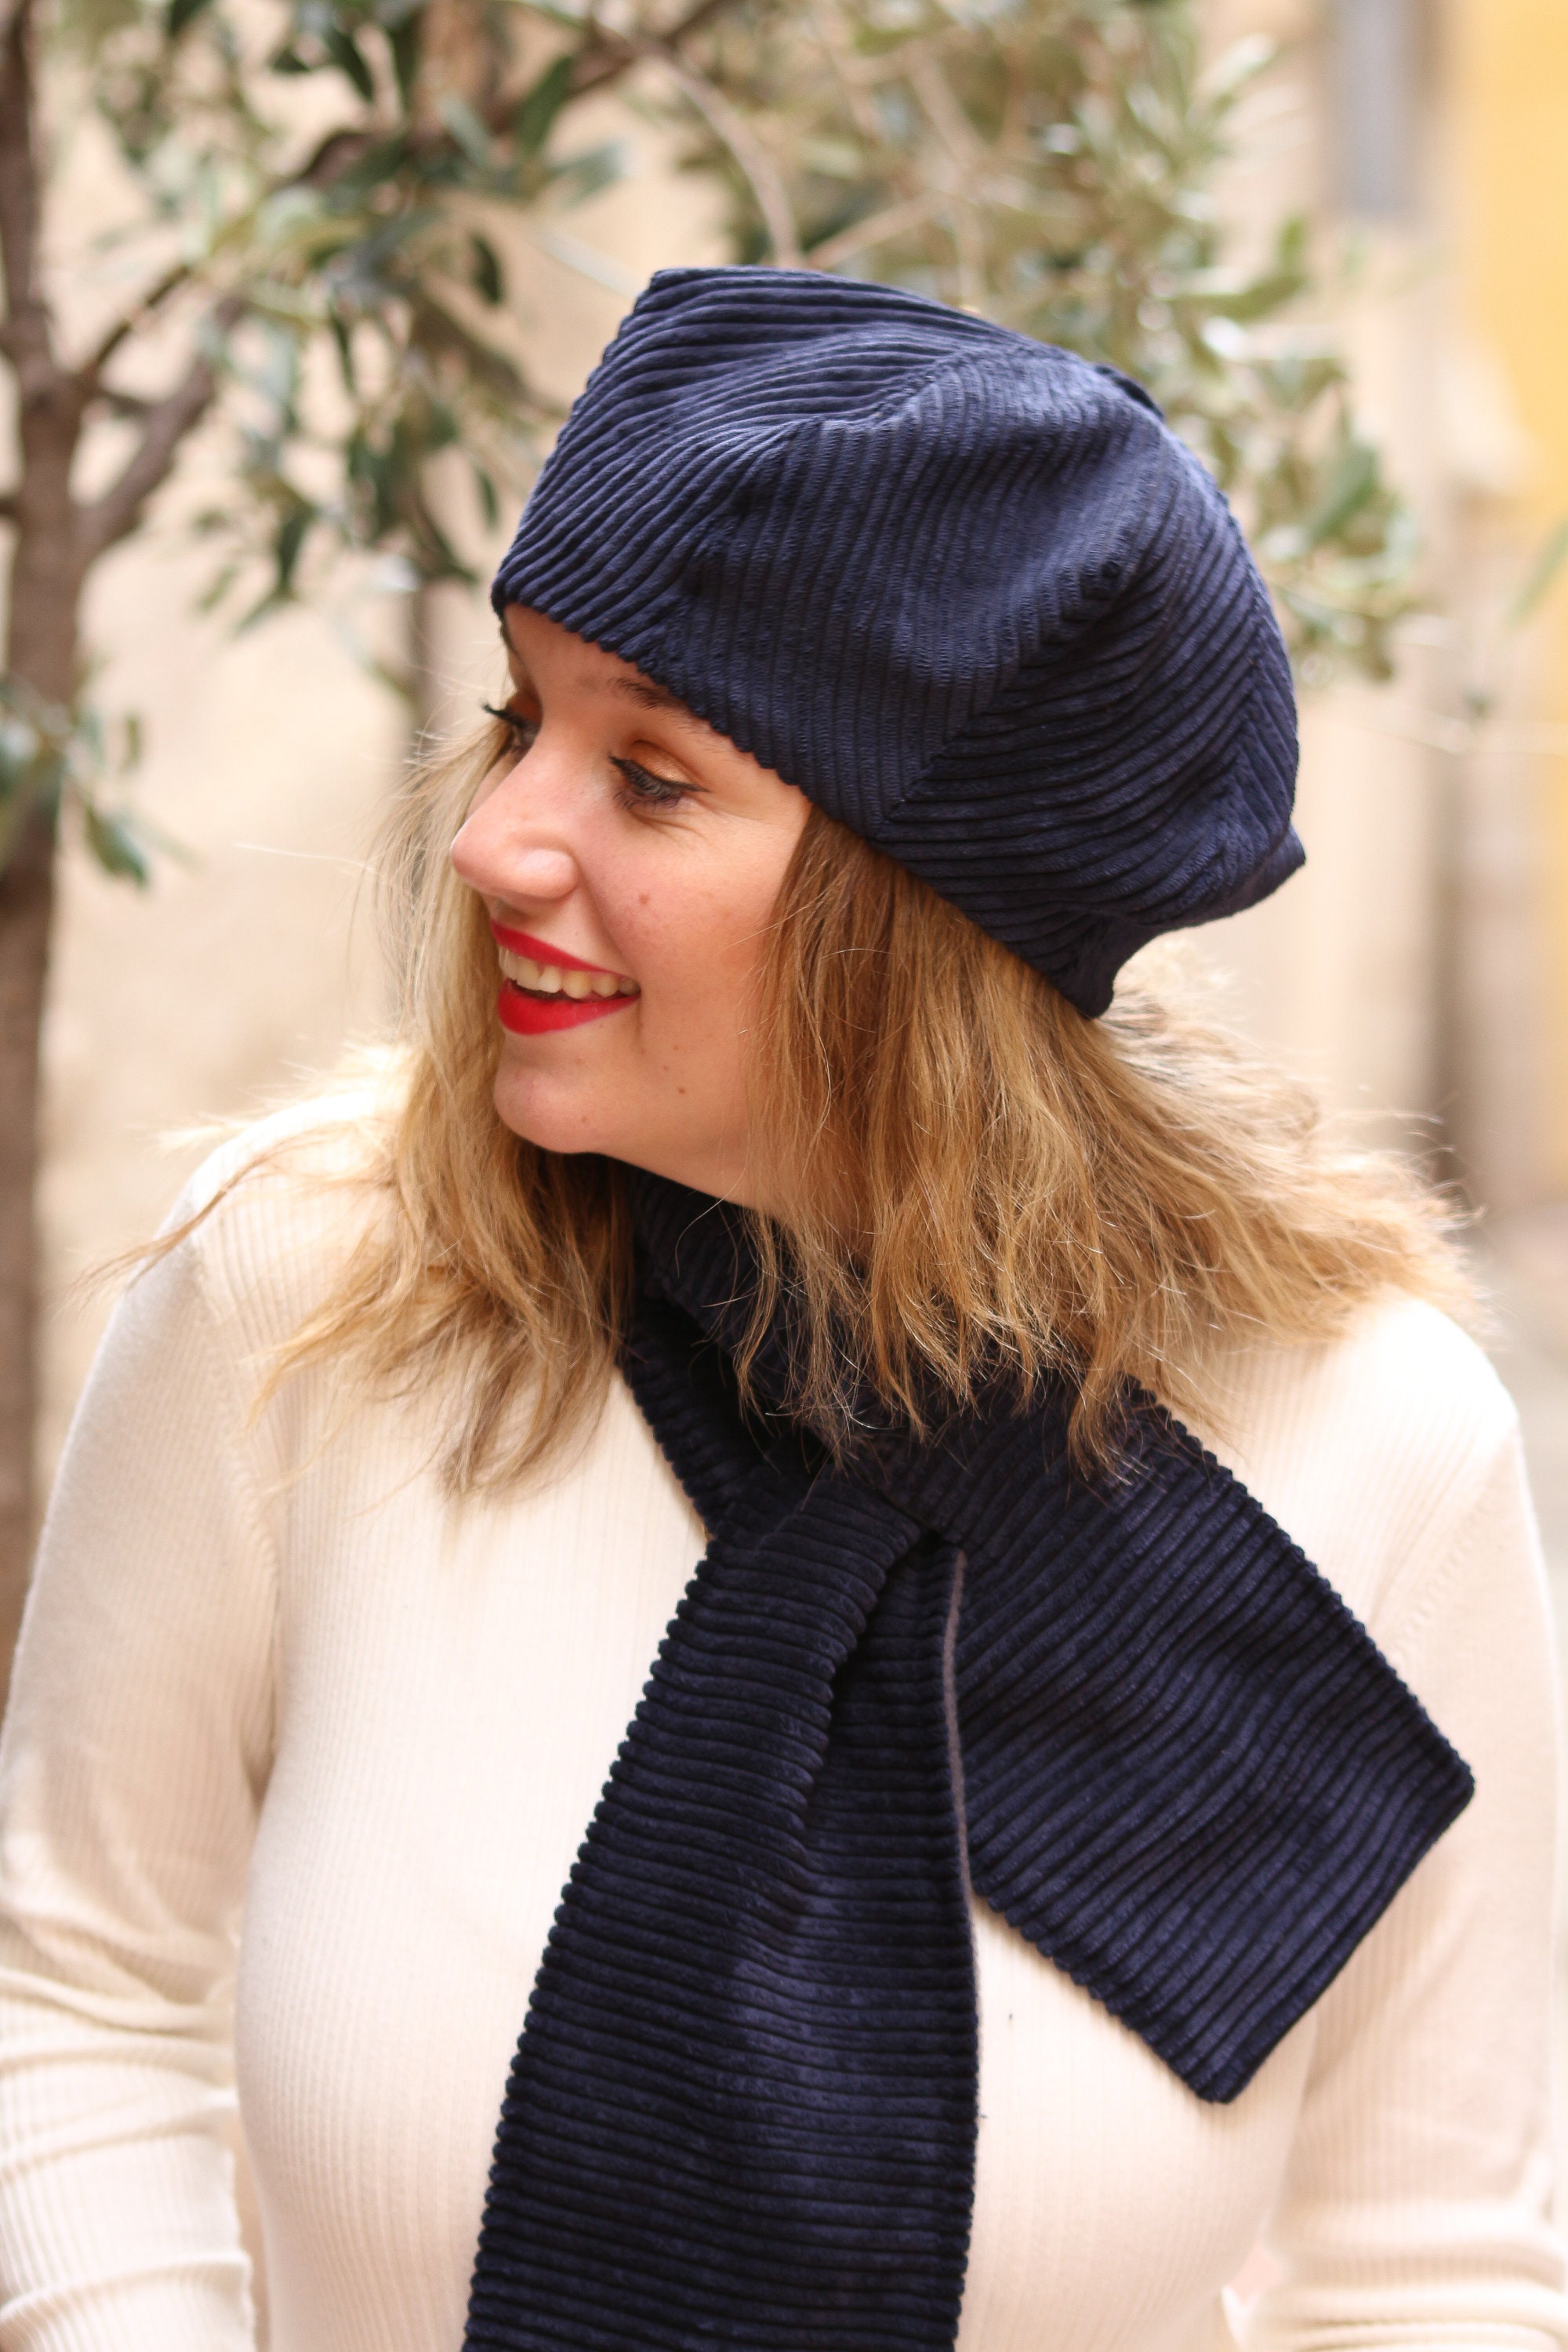 Navy blue corduroy beret hat for women Slouchy french beret | Etsy